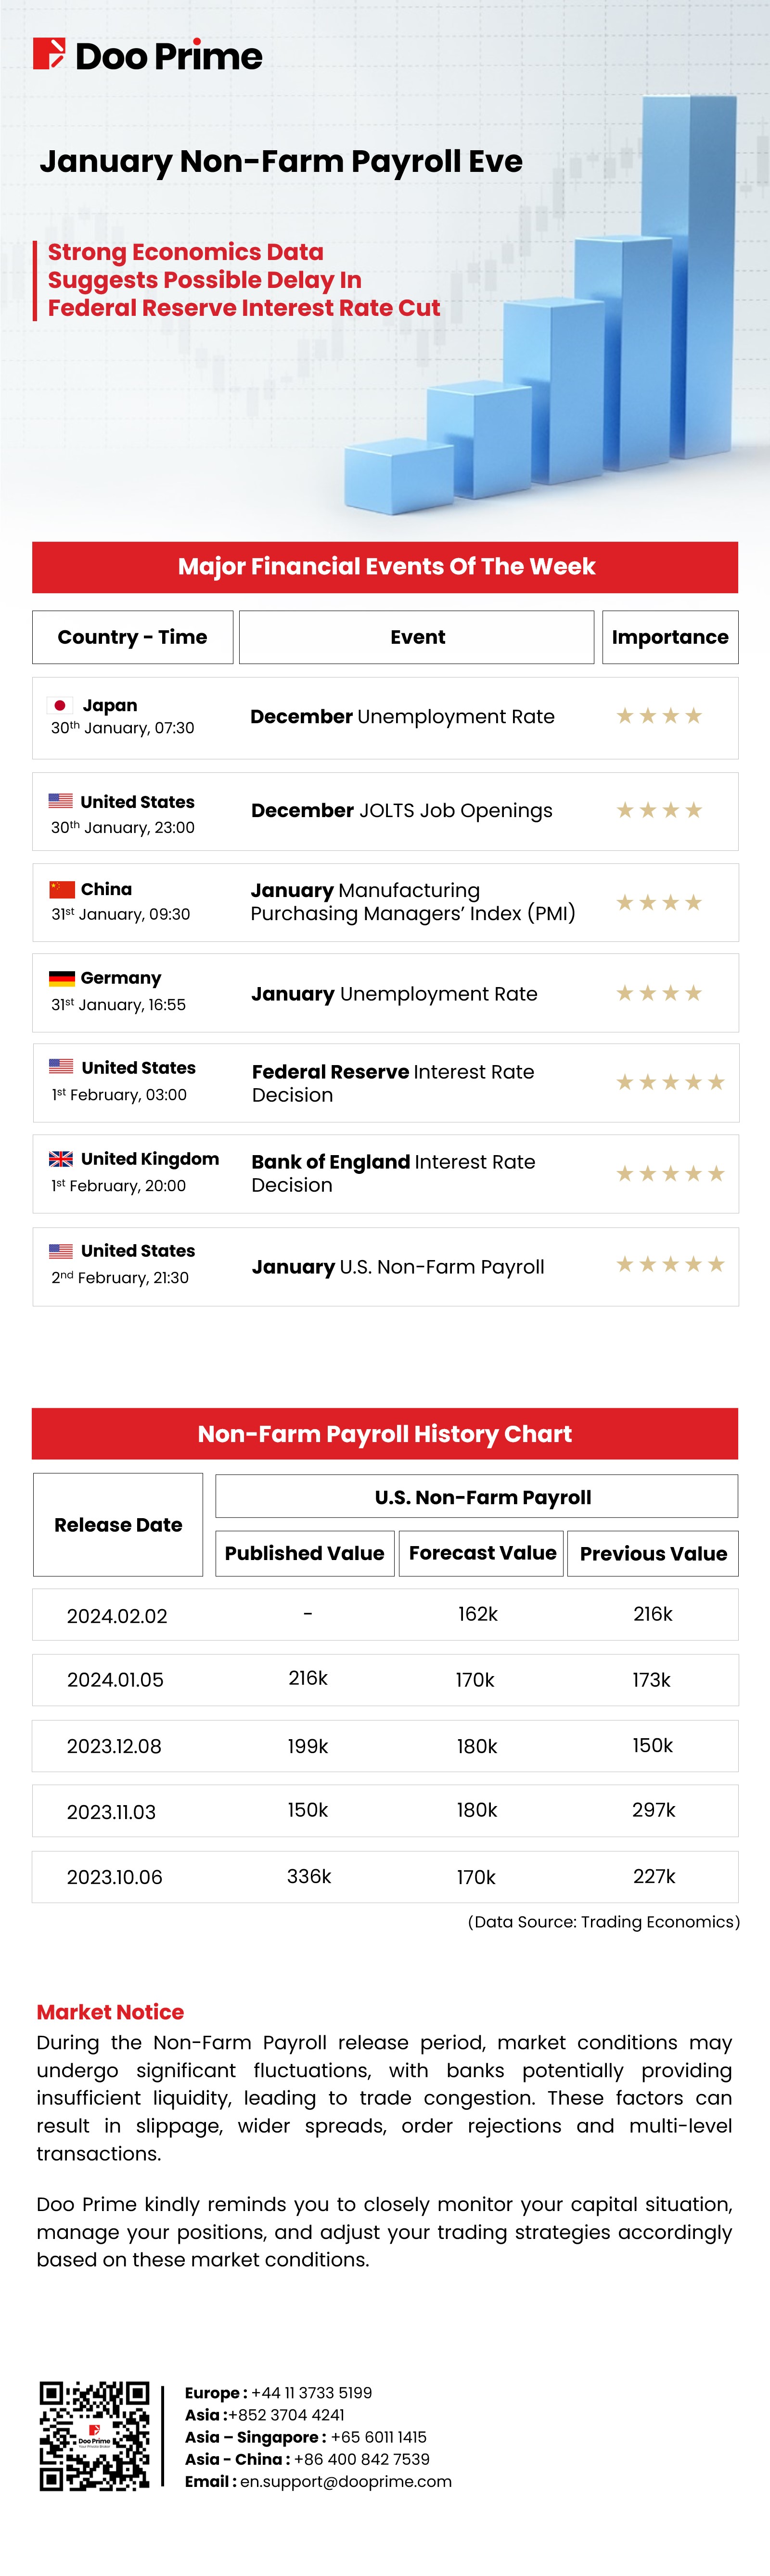 January Non-Farm Payroll Eve: Strong Data Spurs Possible Delay In Fed Rate Cut